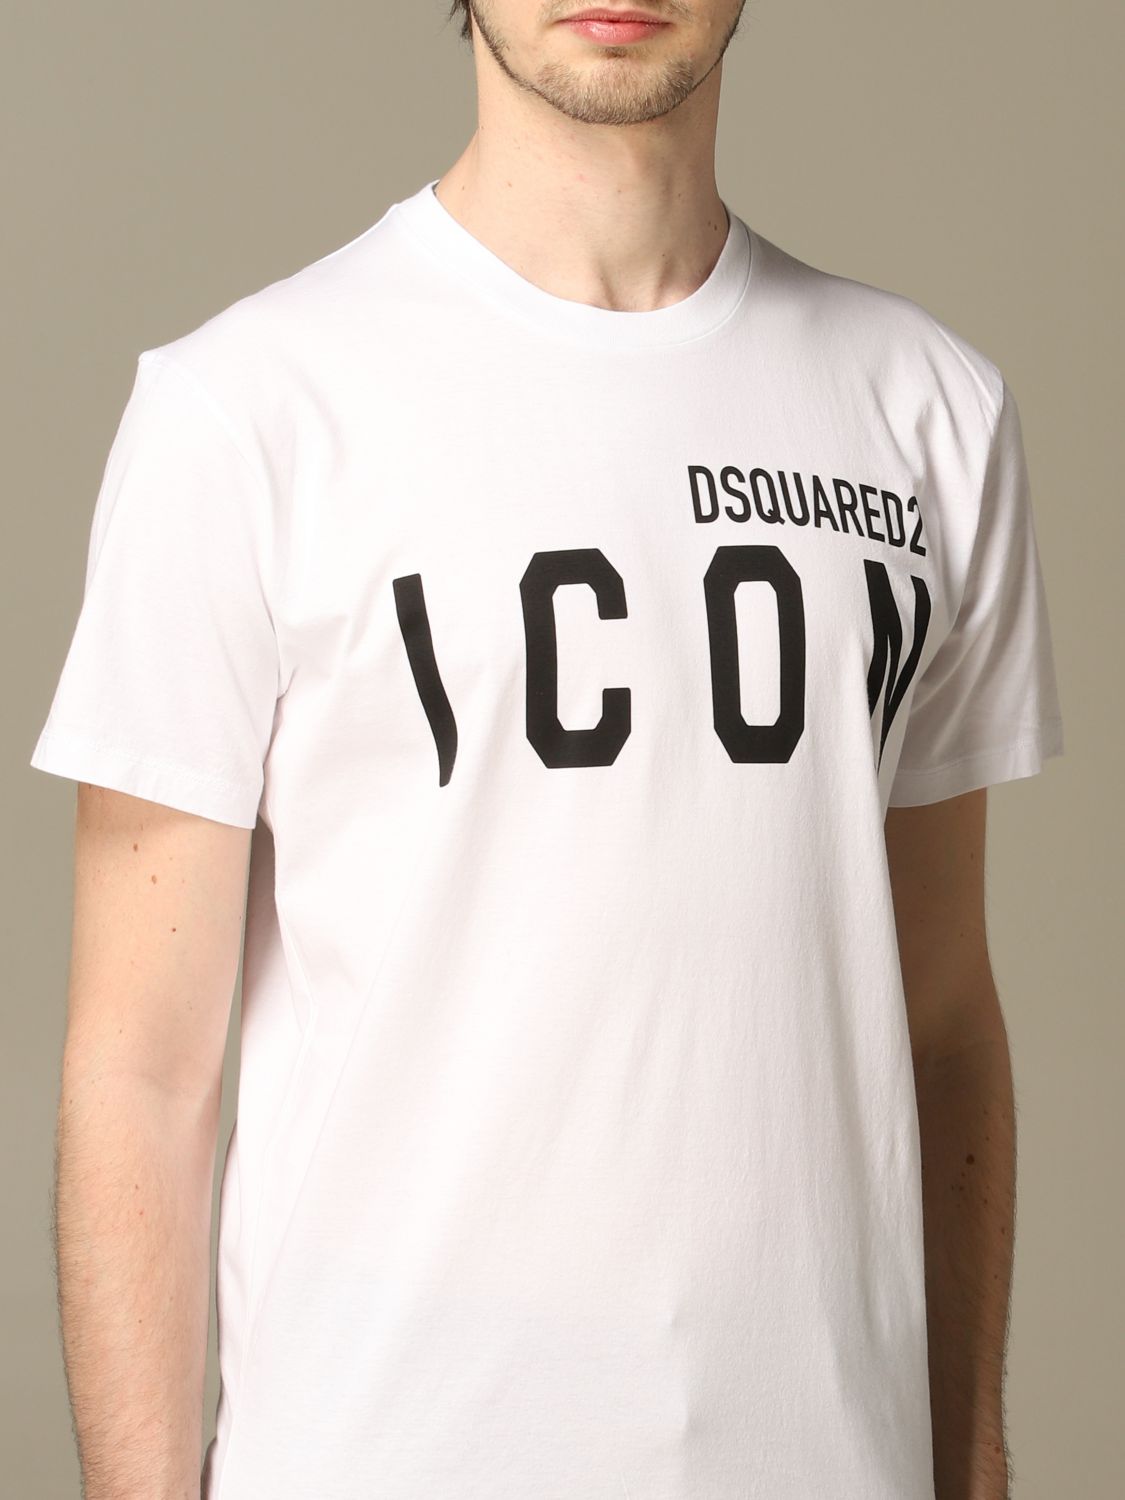 dsquared tee shirt homme